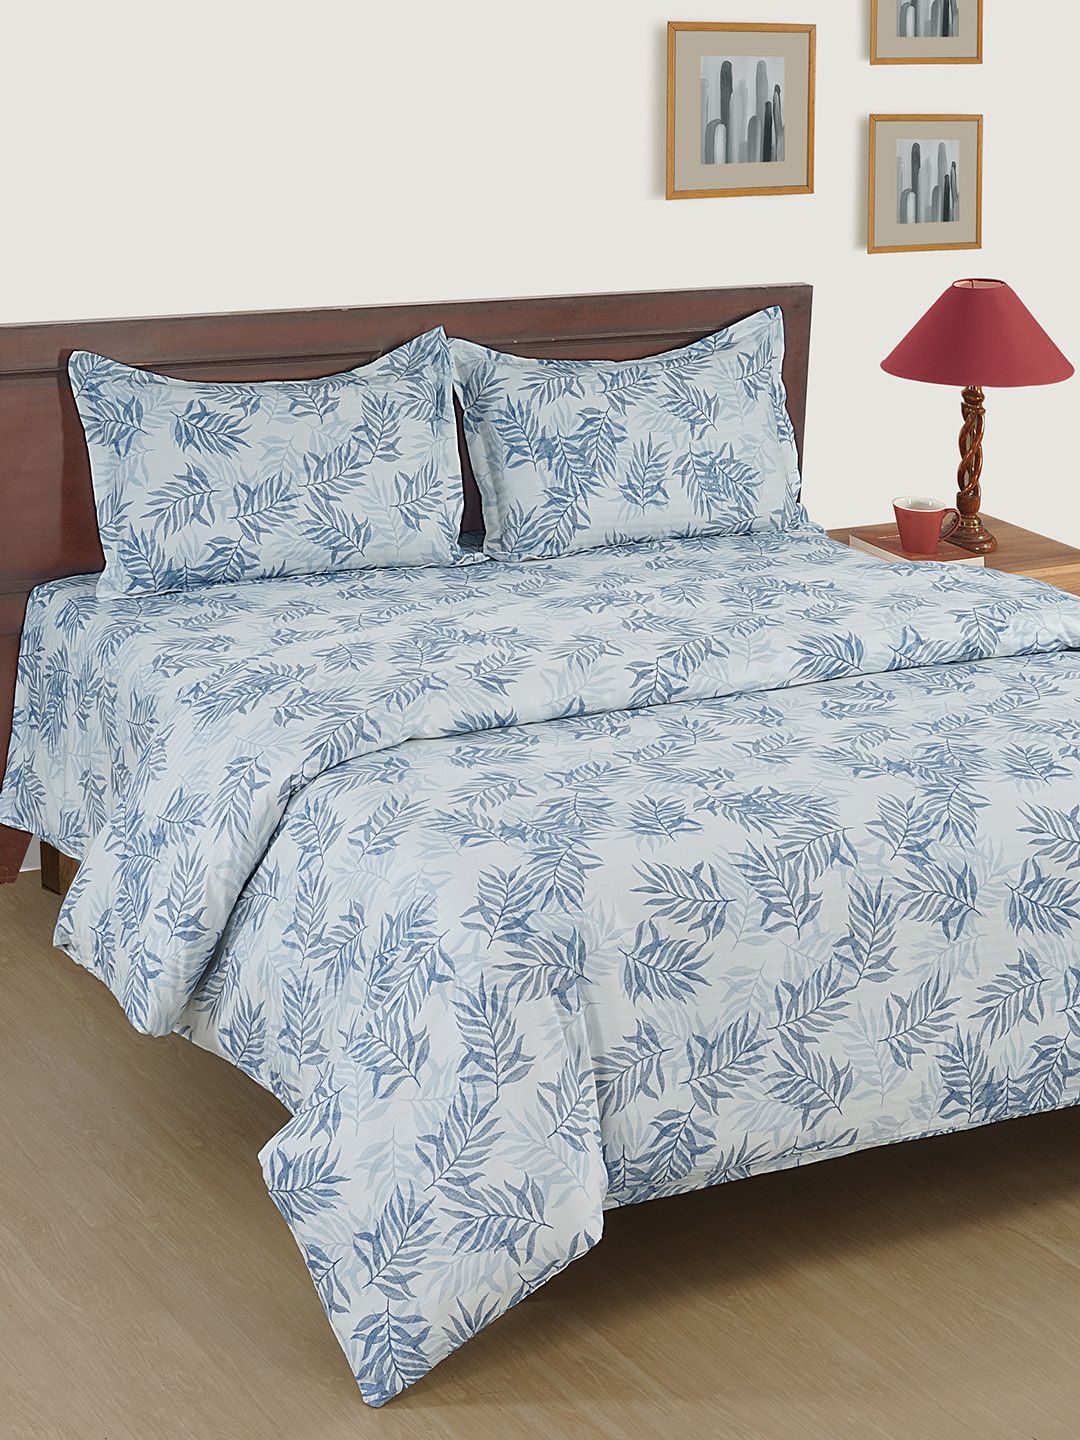 SWAYAM Blue & White Geometric 250 TC Cotton 1 Queen Bedsheet with 2 Pillow Covers Price in India